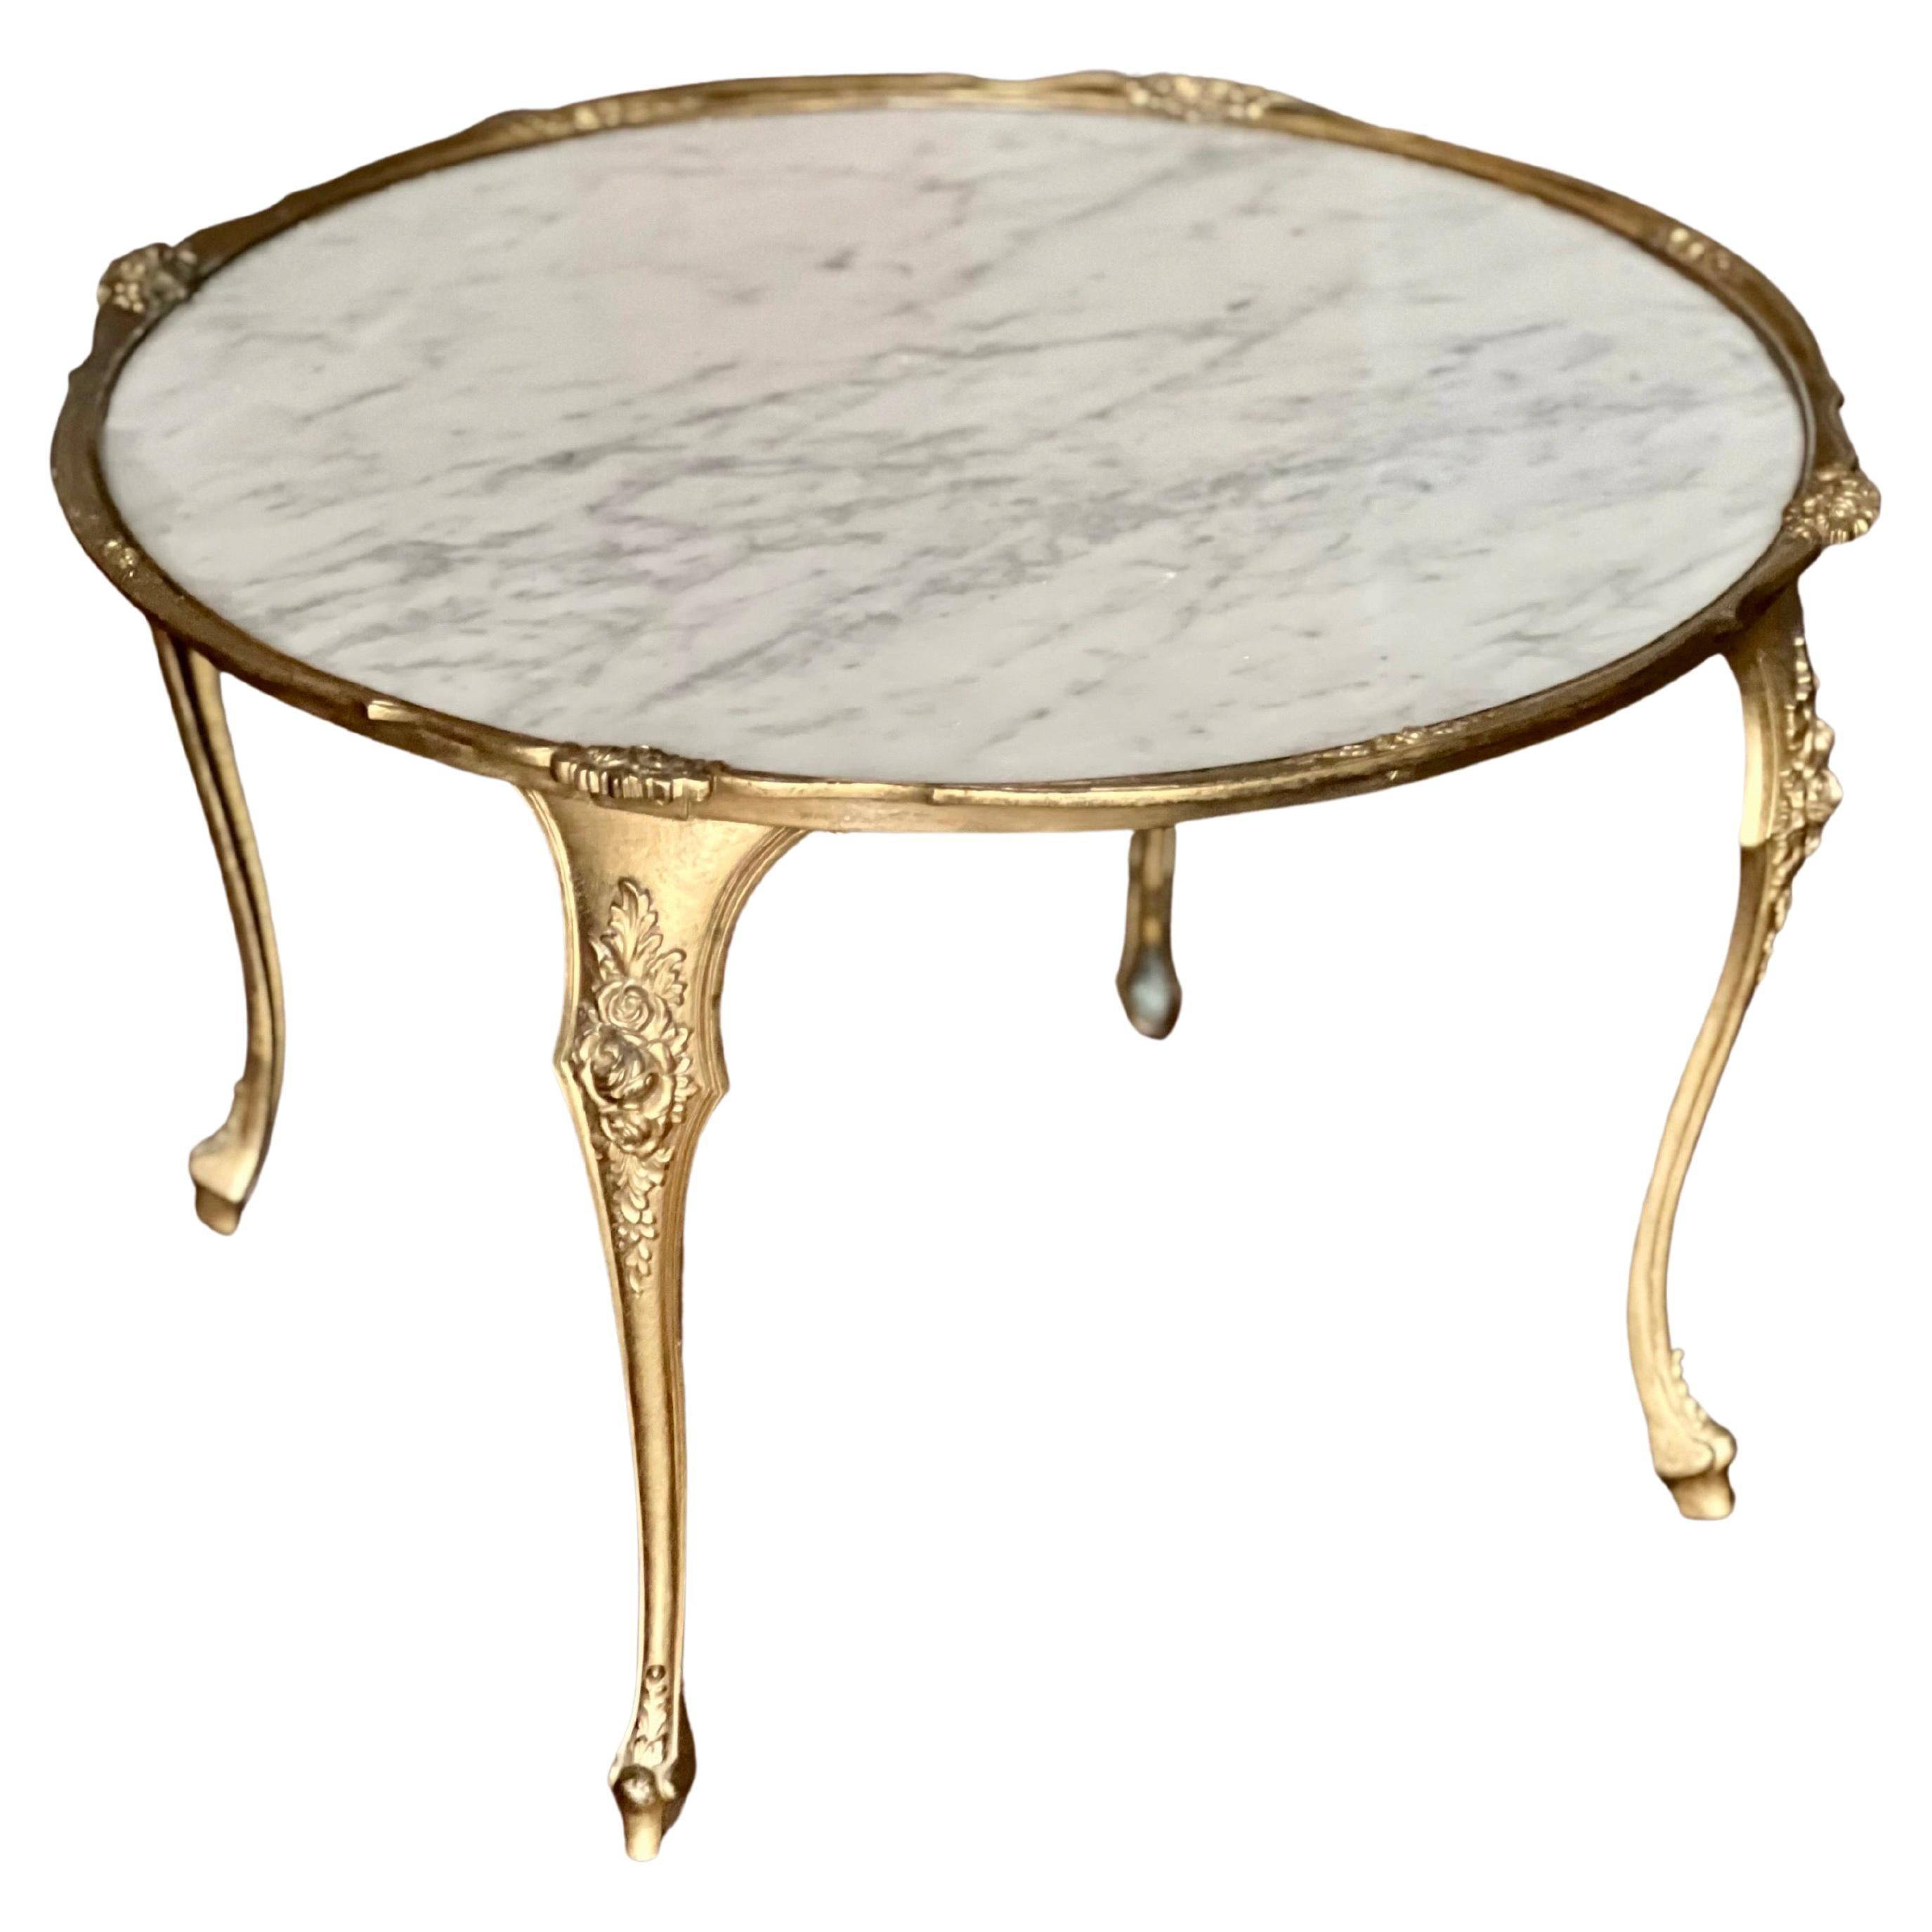 Vintage French Empire Solid Brass and Carrara Marble Top Coffee or Side Table